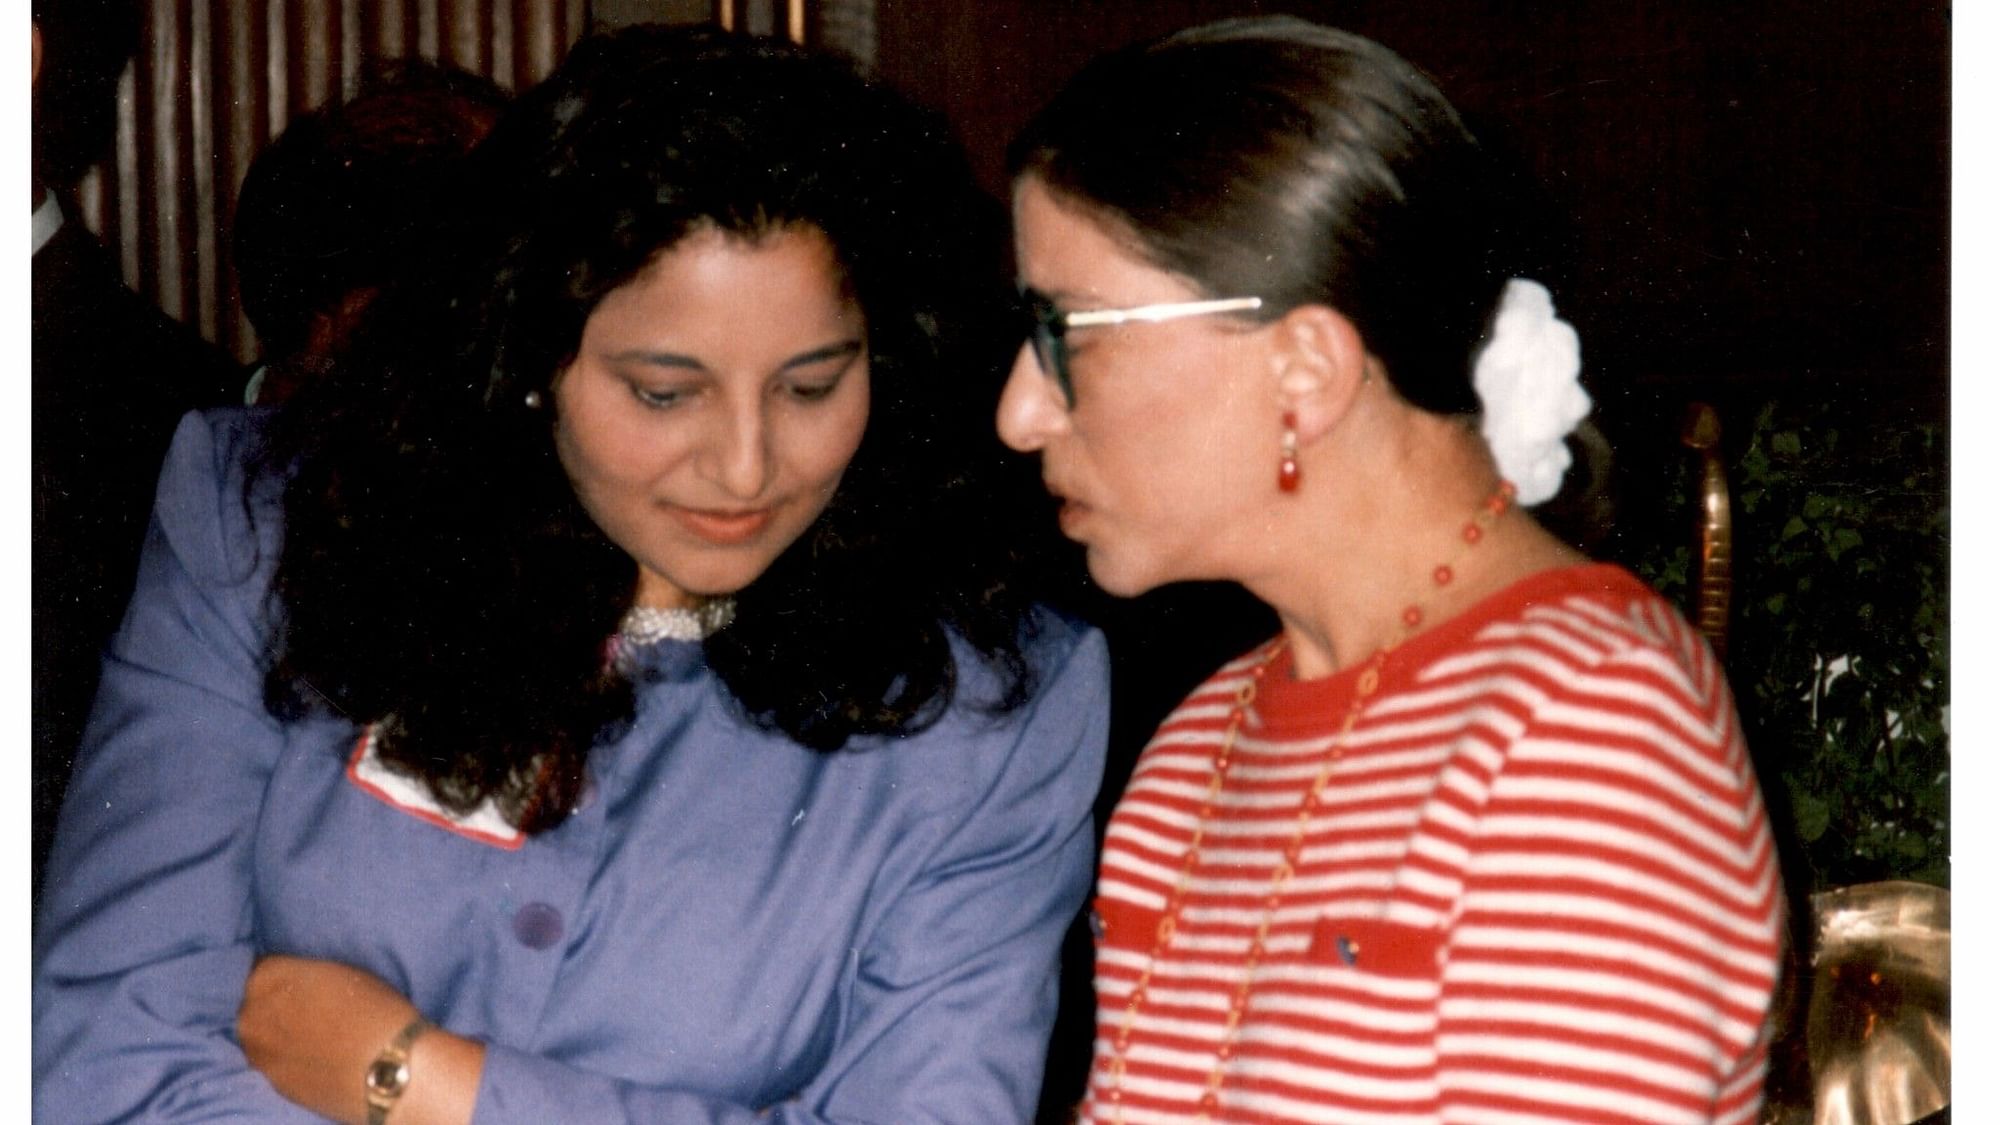 This image is “from the reception [RBG] graciously agreed to host at the Supreme Court for the fledgling Indian American bar association in 1995”, writes Indian American lawyer, Preeta Bansal.